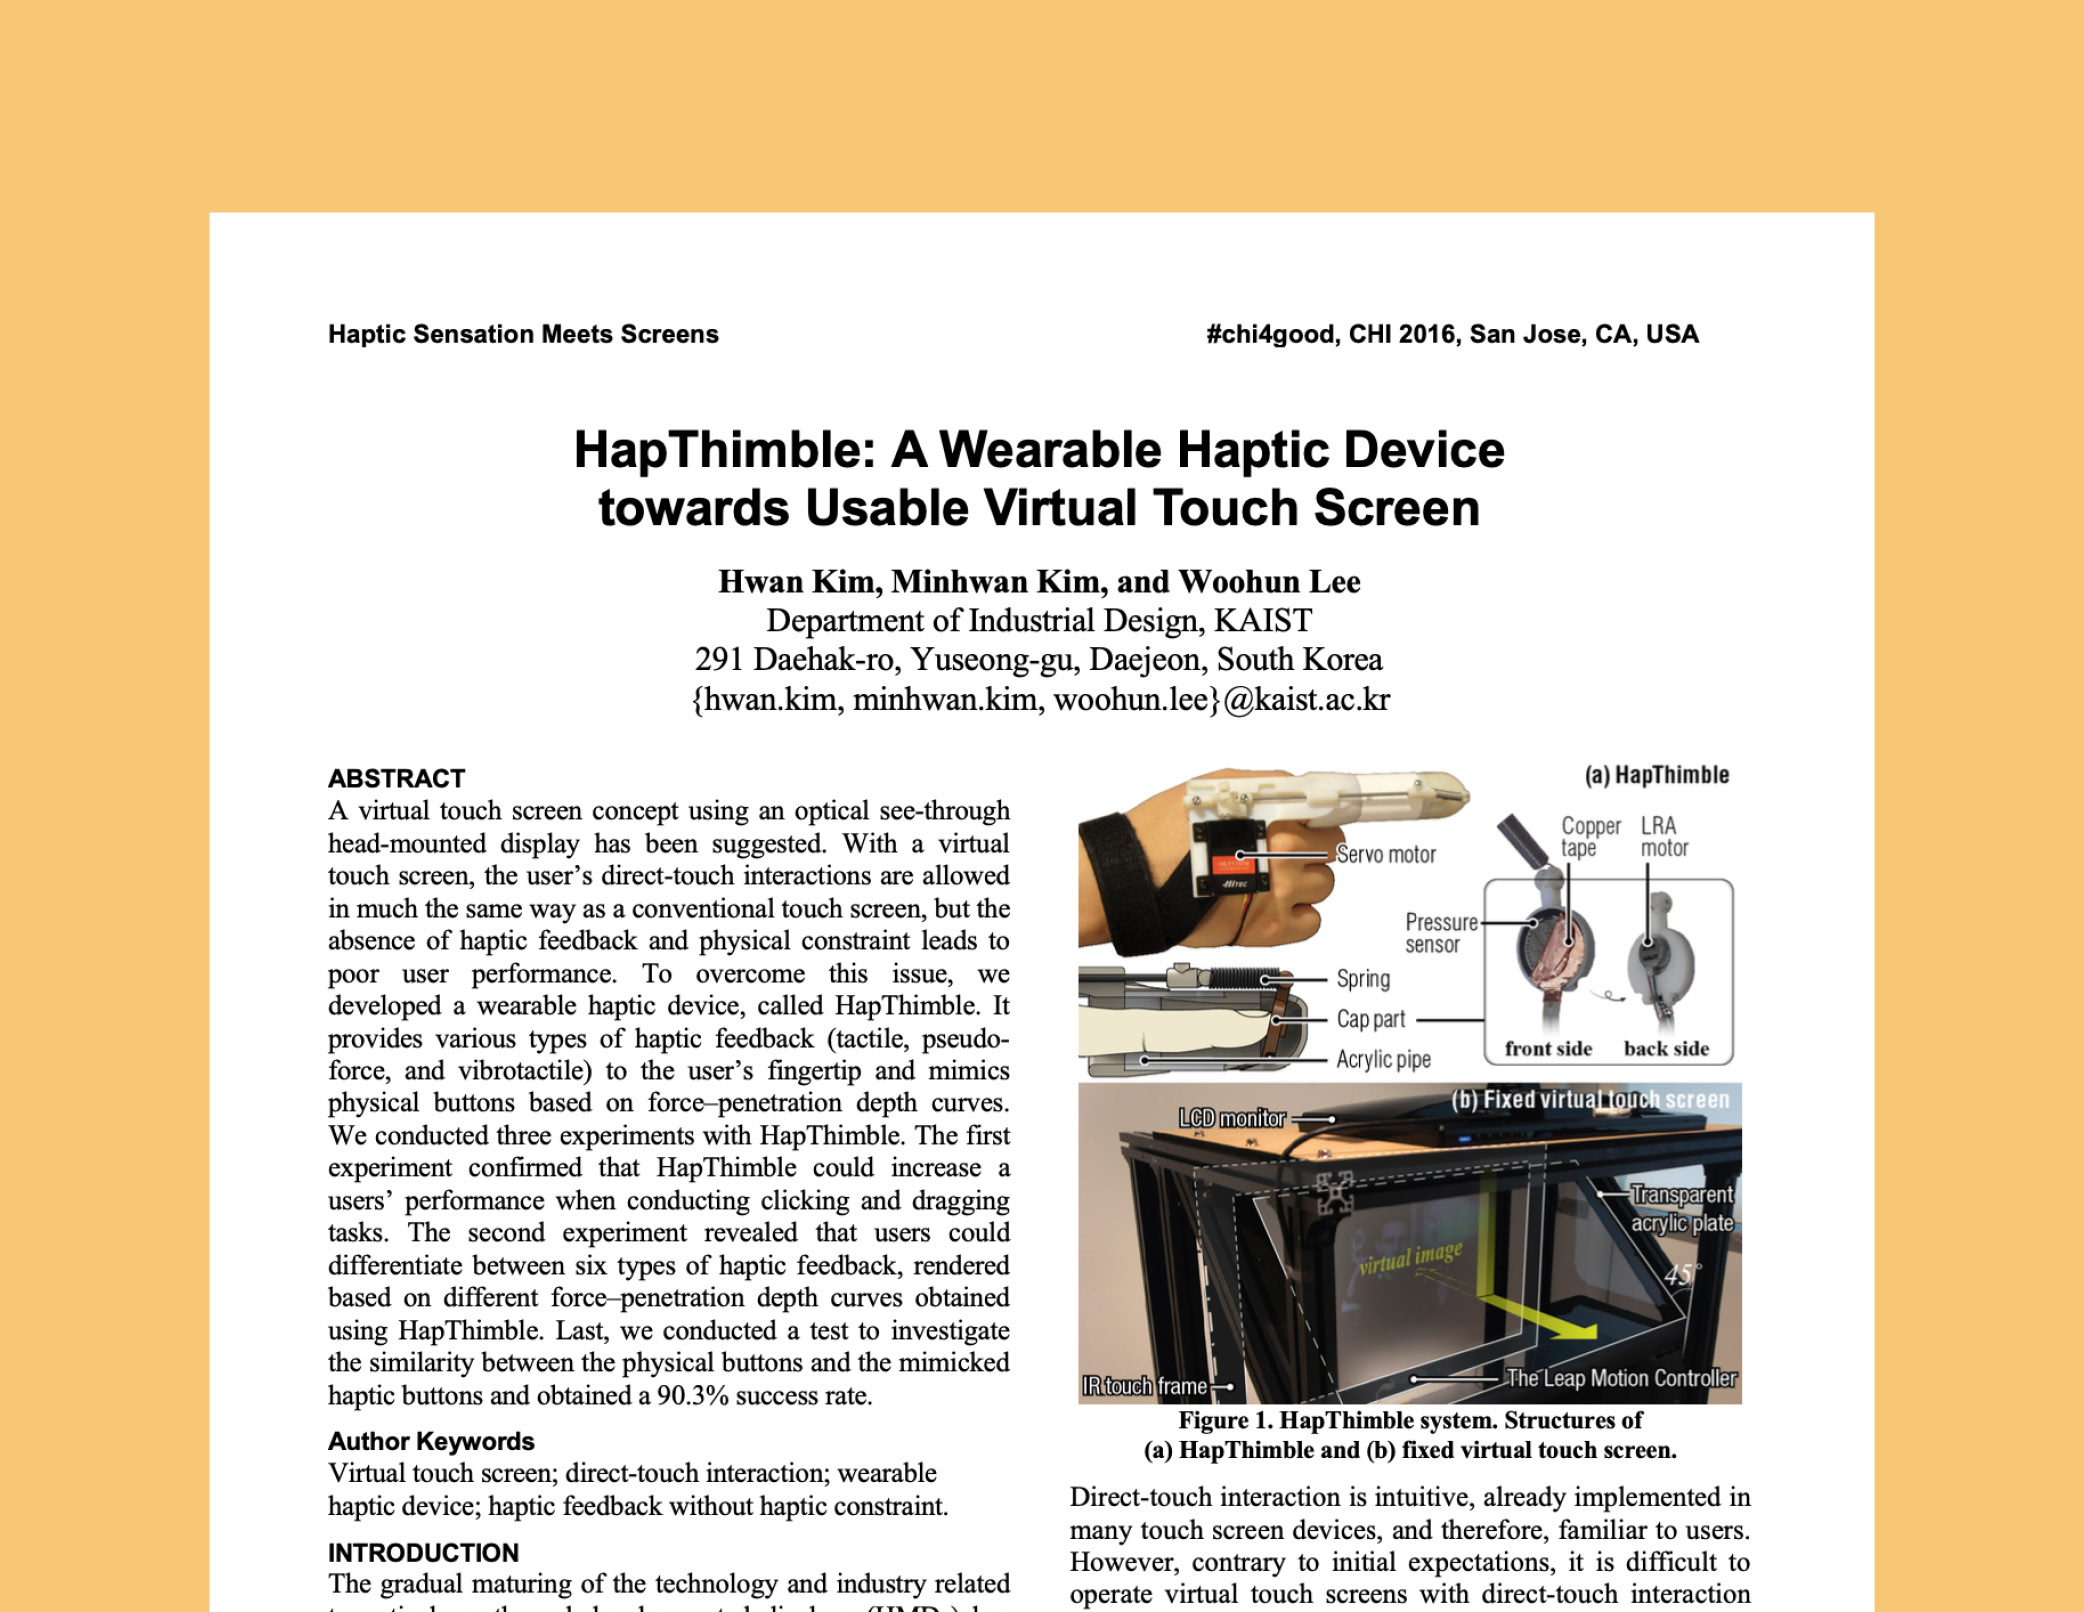 HapThimble: A Wearable Haptic Device towards Usable Virtual Touch Screen
        